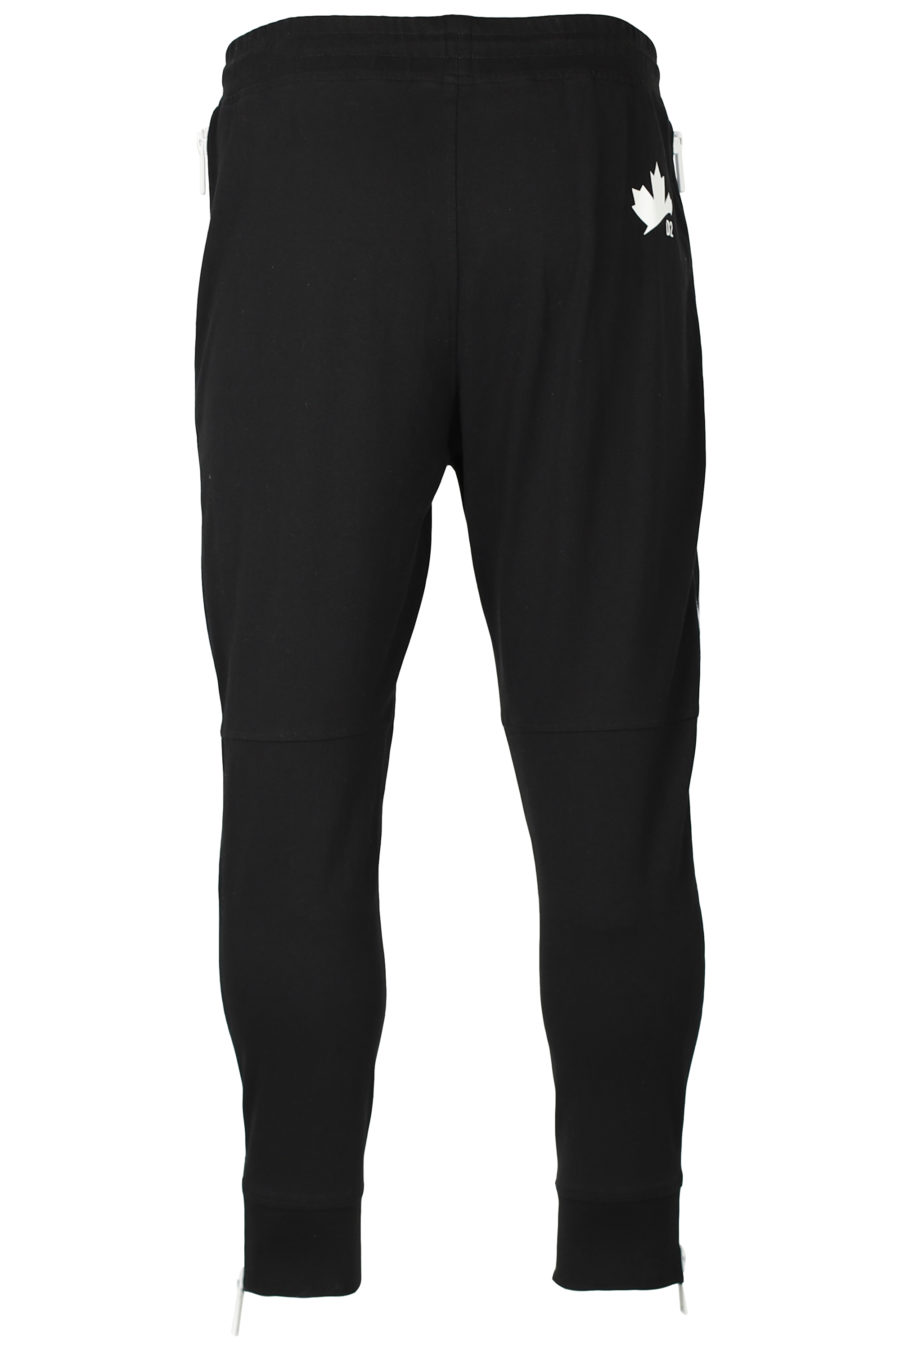 Tracksuit trousers with white zips - IMG 2690